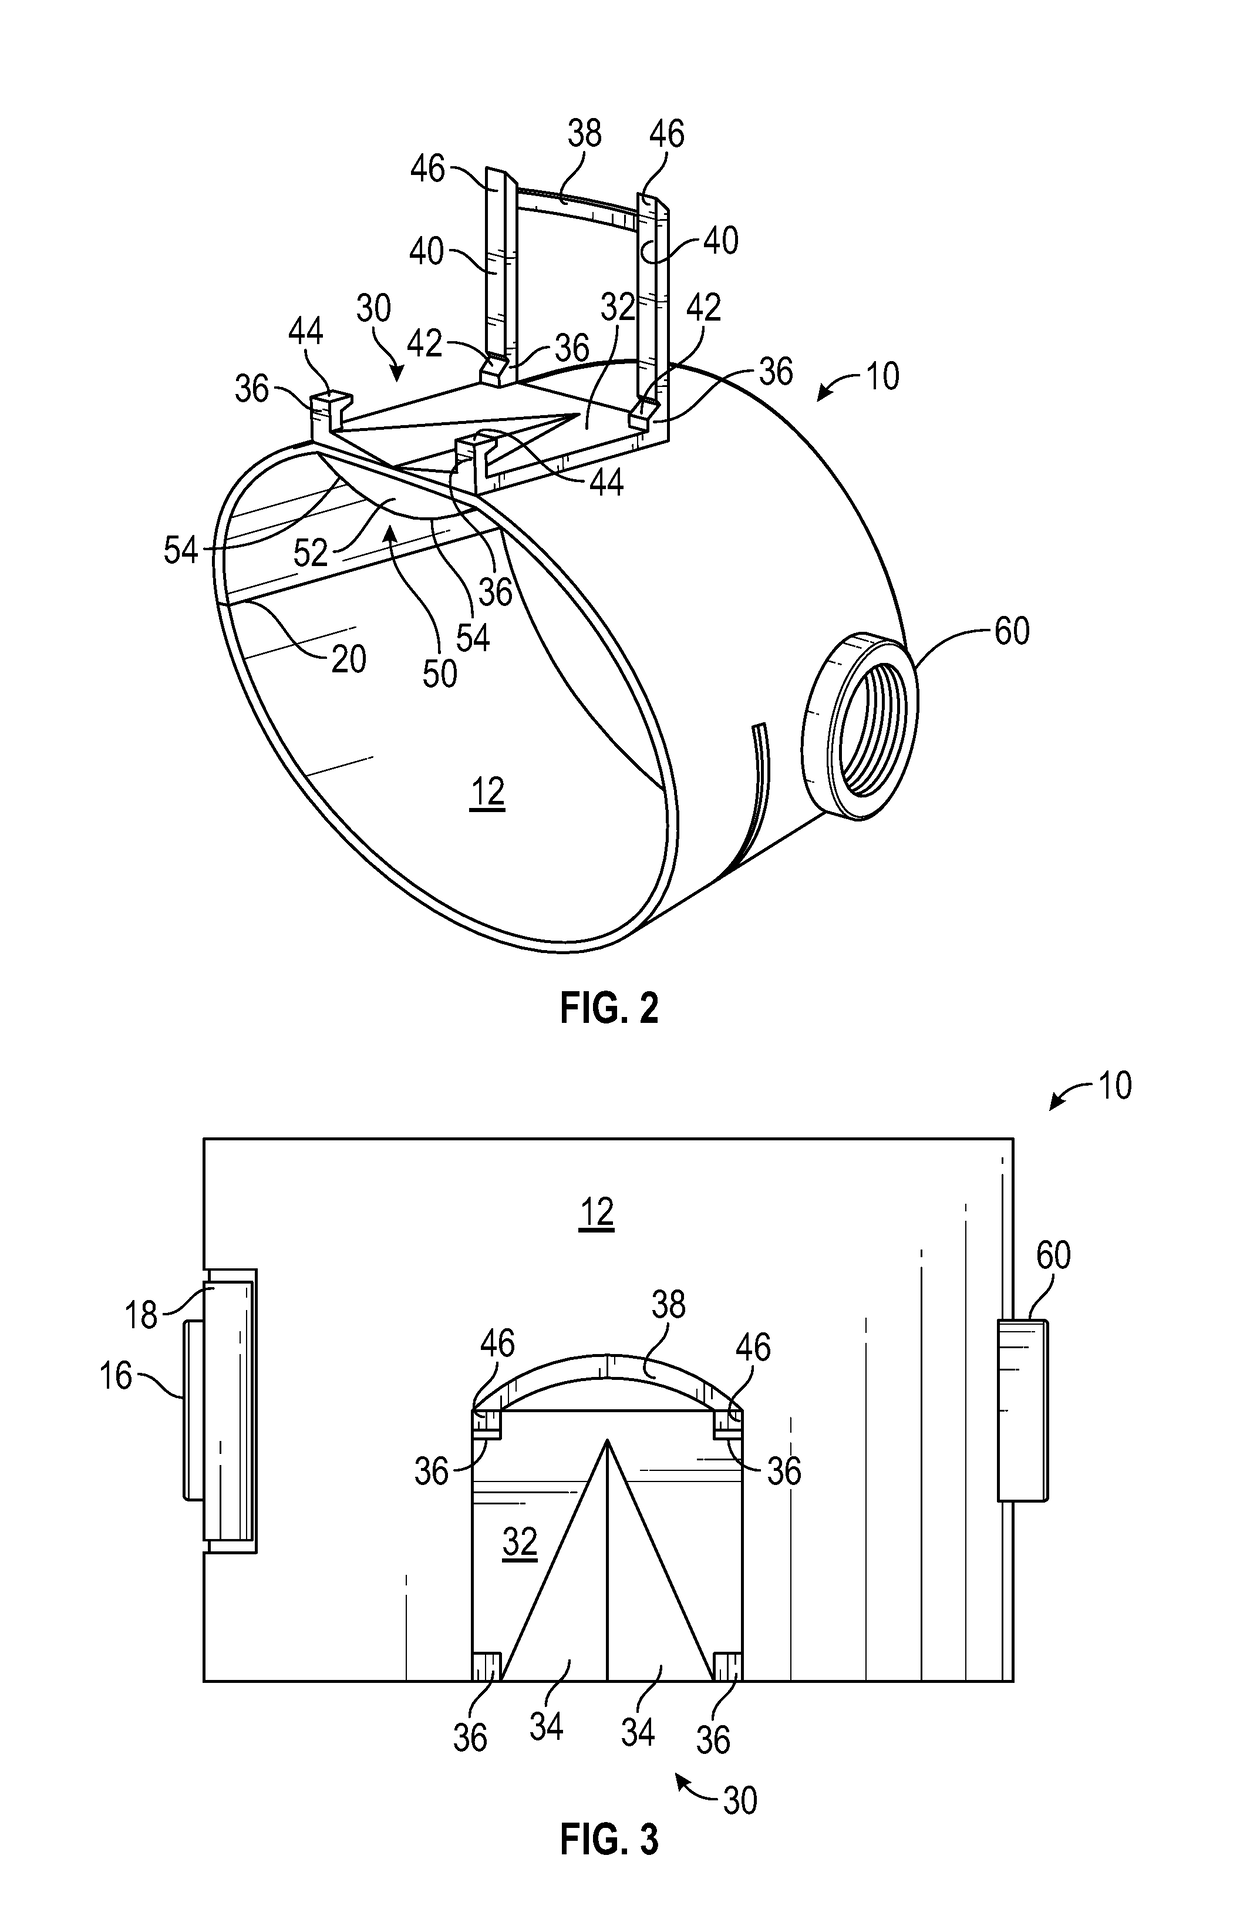 Transradial Sheath Support and Hemostasis Device and Method